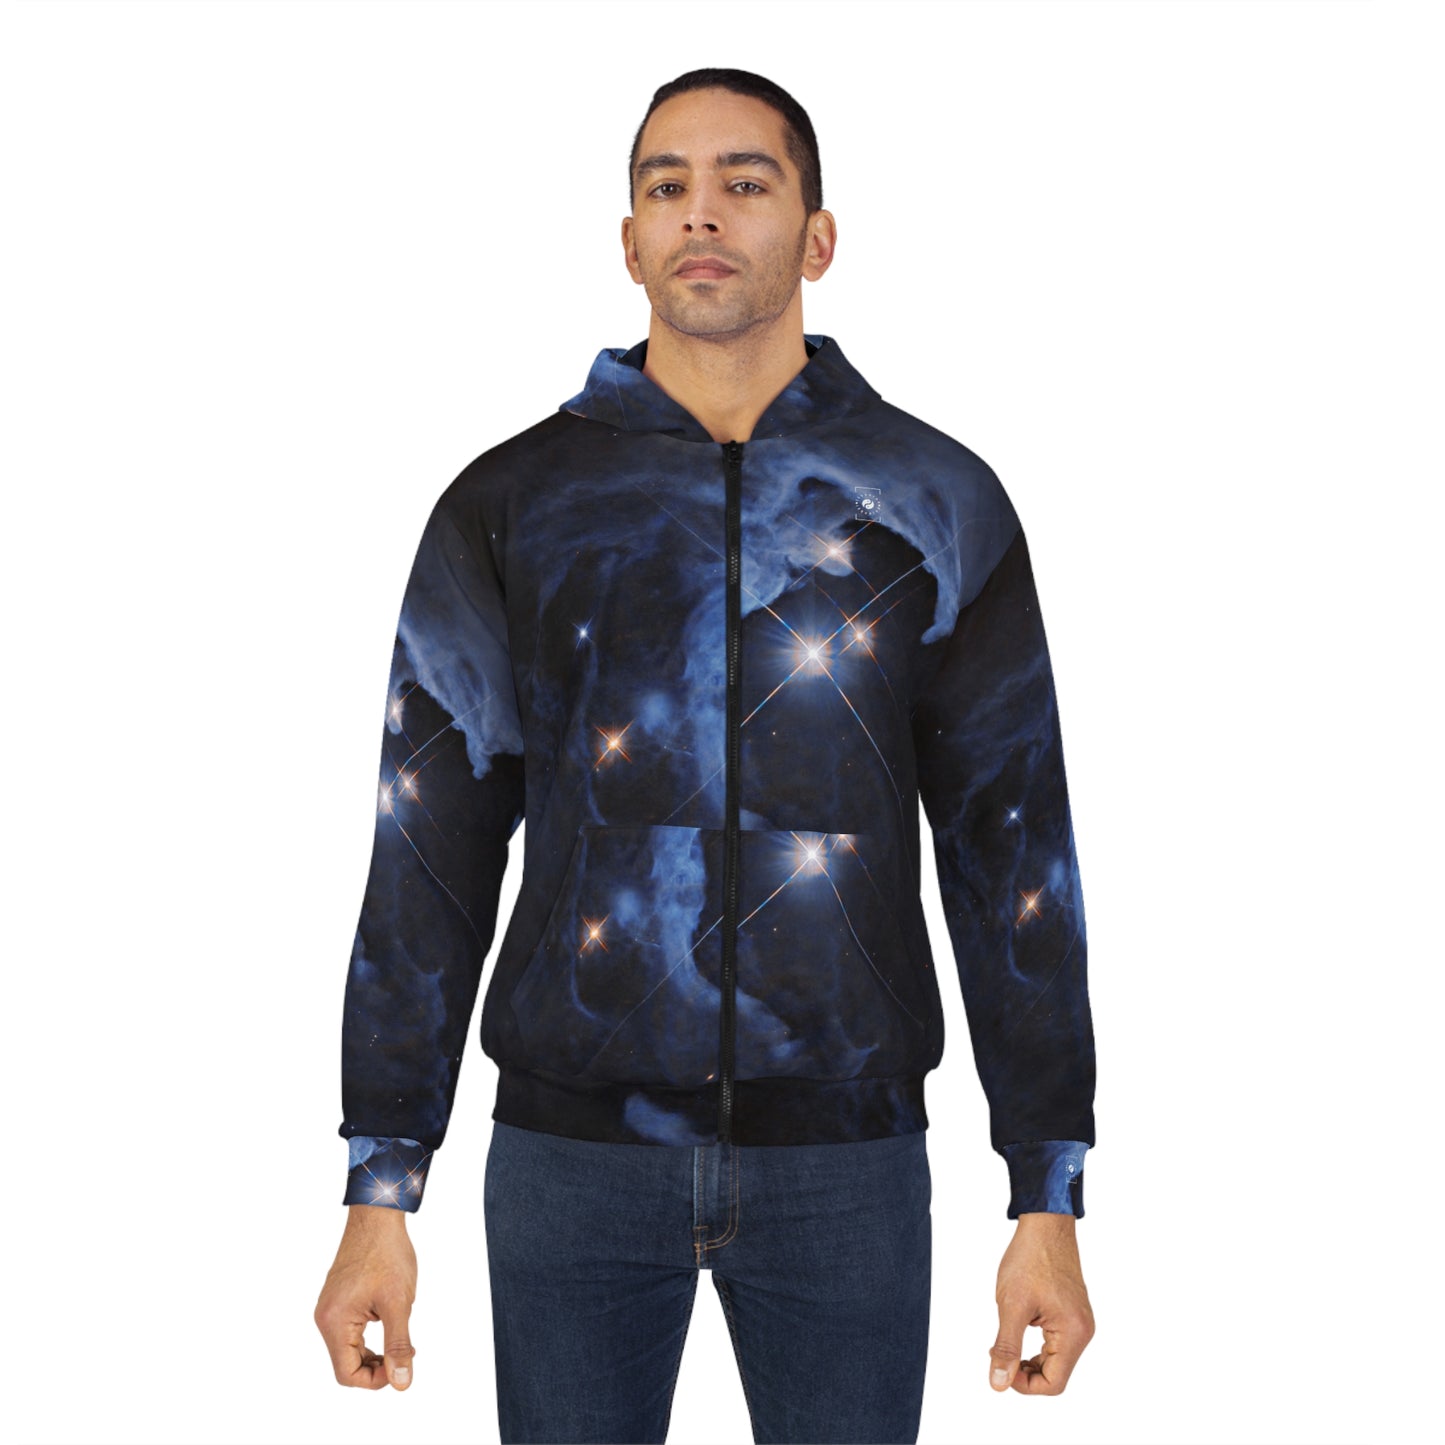 HP Tau, HP Tau G2, and G3 3 star system captured by Hubble - Zip Hoodie